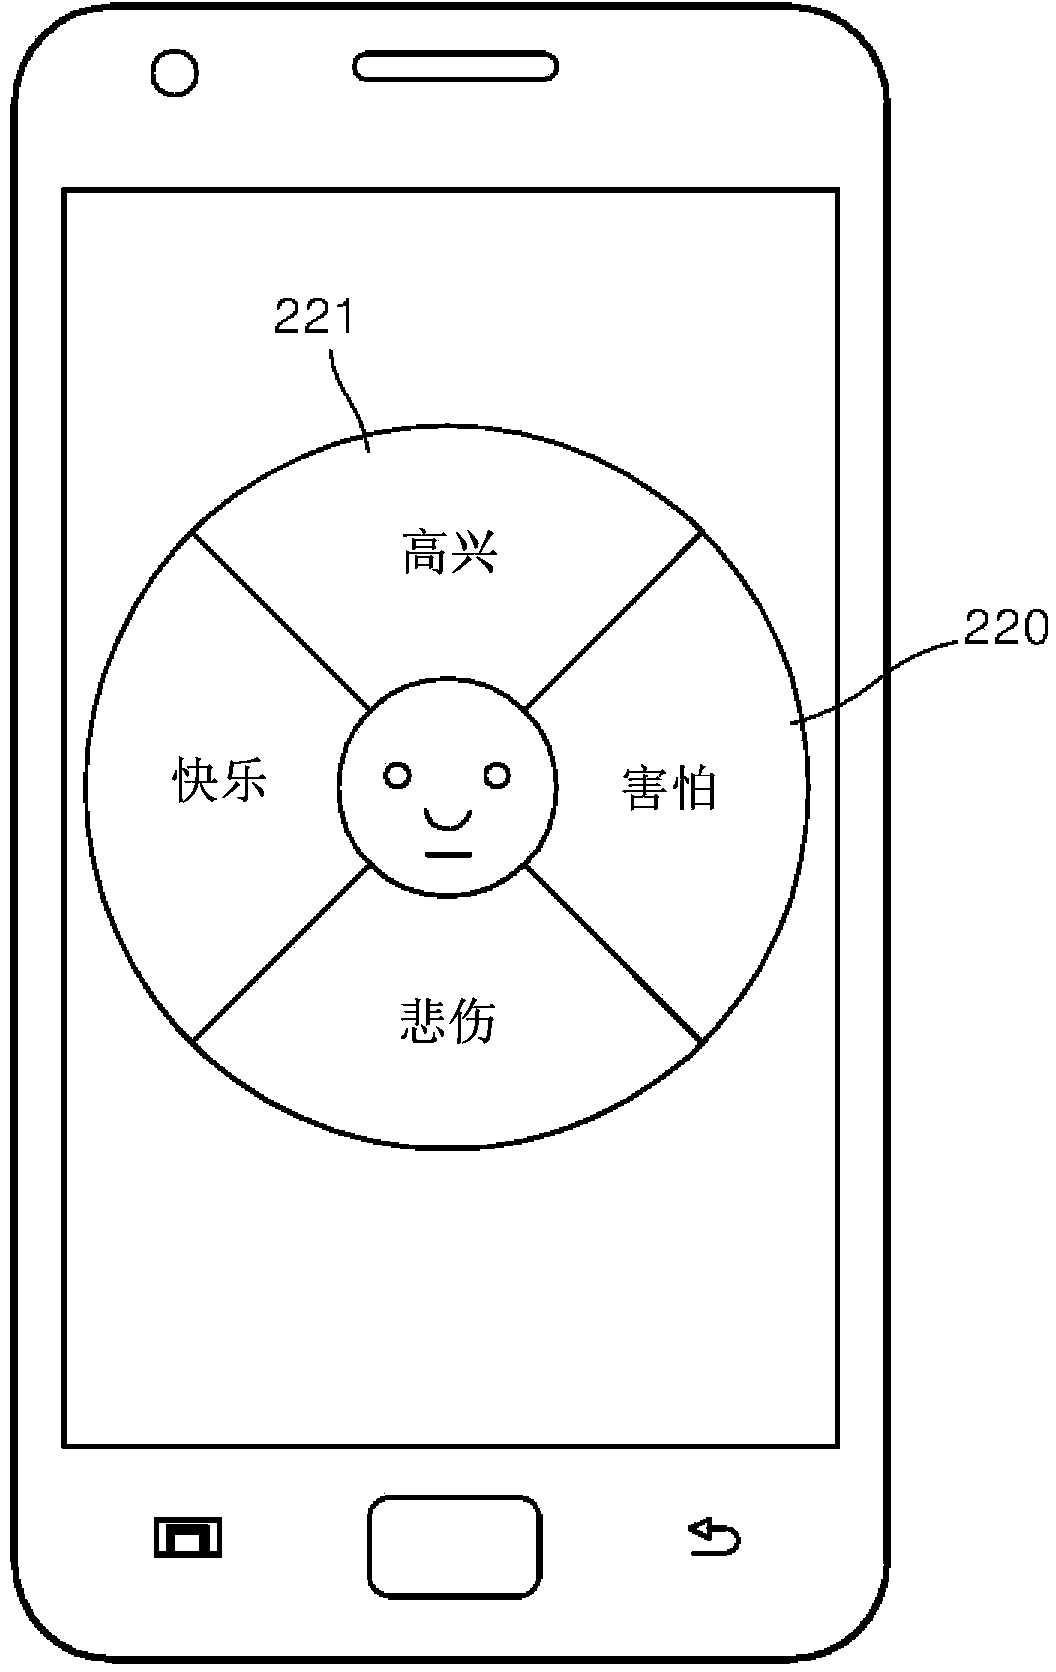 Method and system for expressing emotion during game play